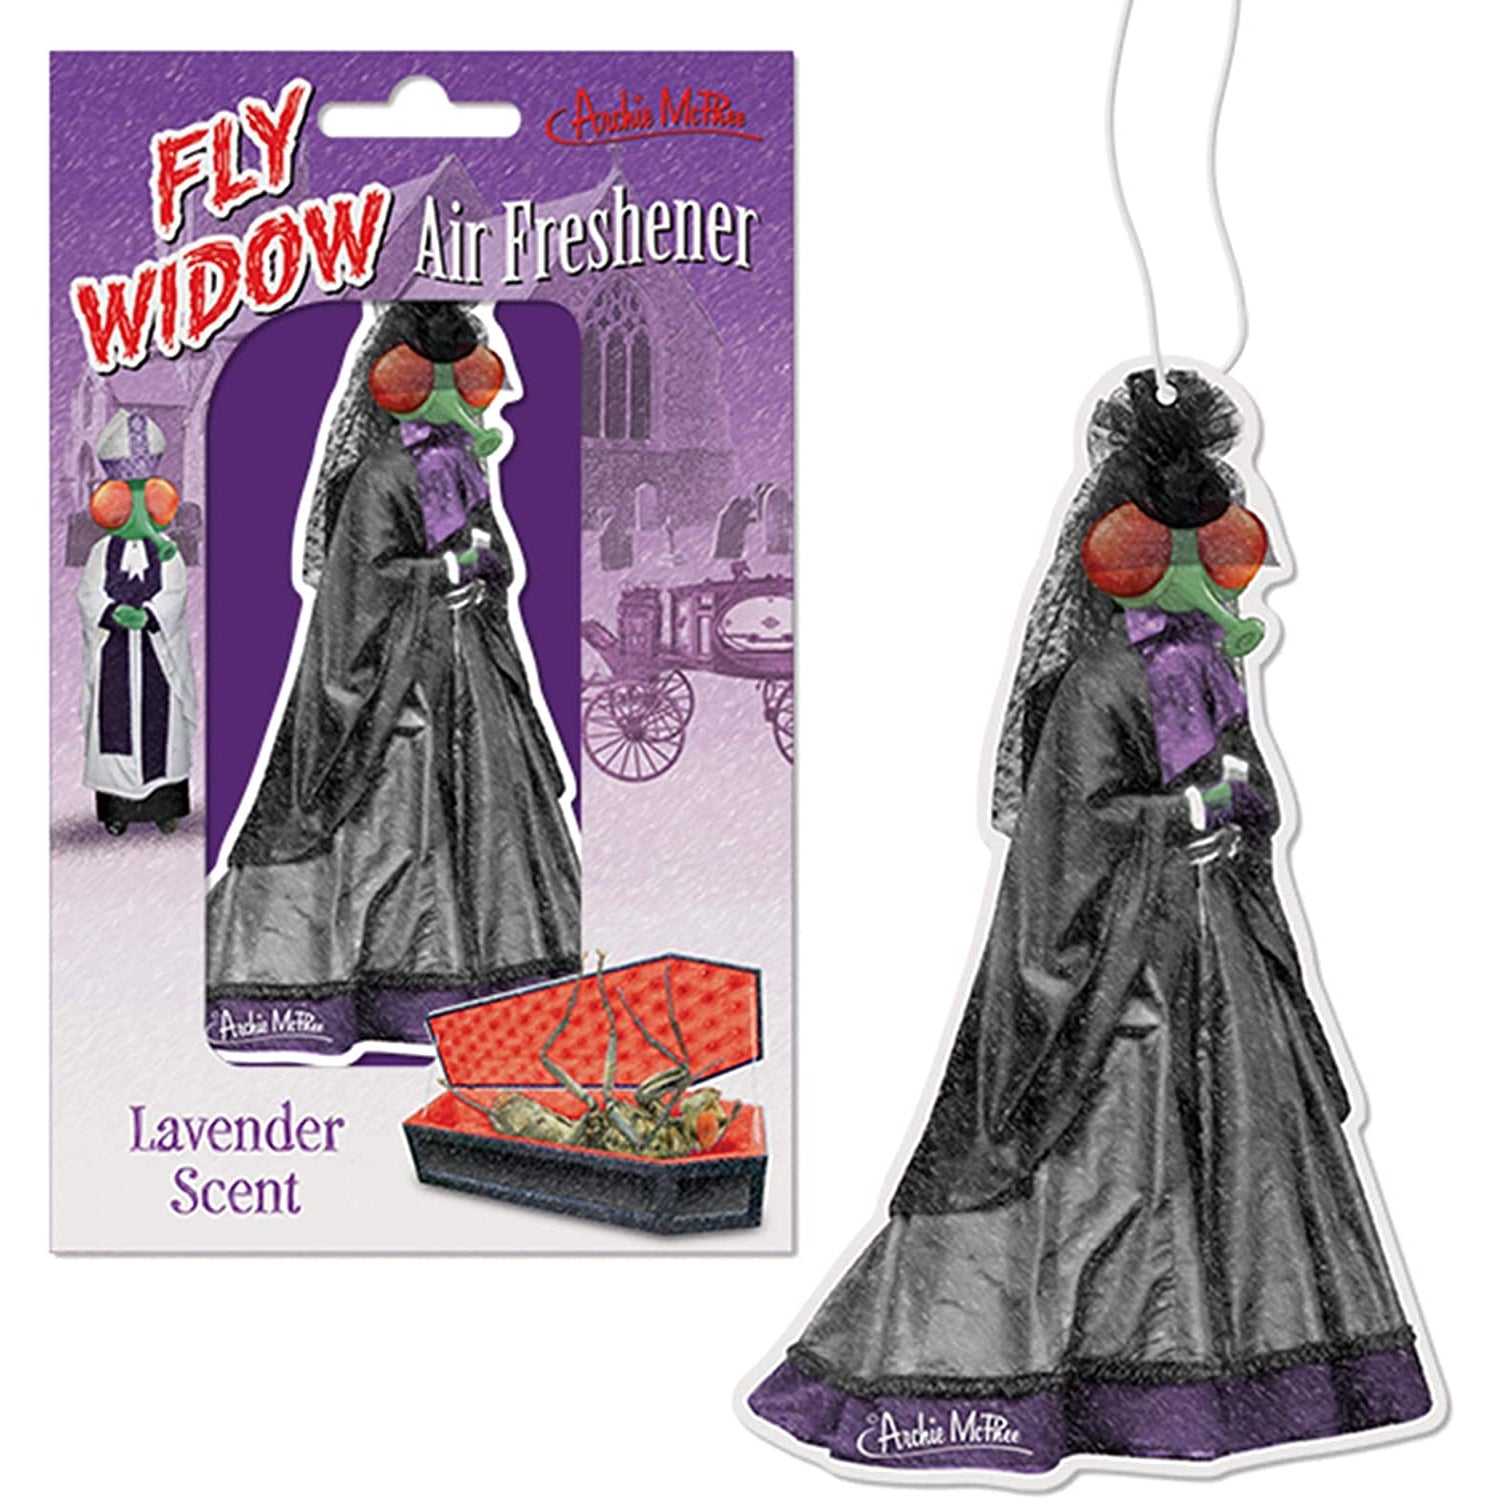 Fly Widow Air Freshener in Lavender Scent